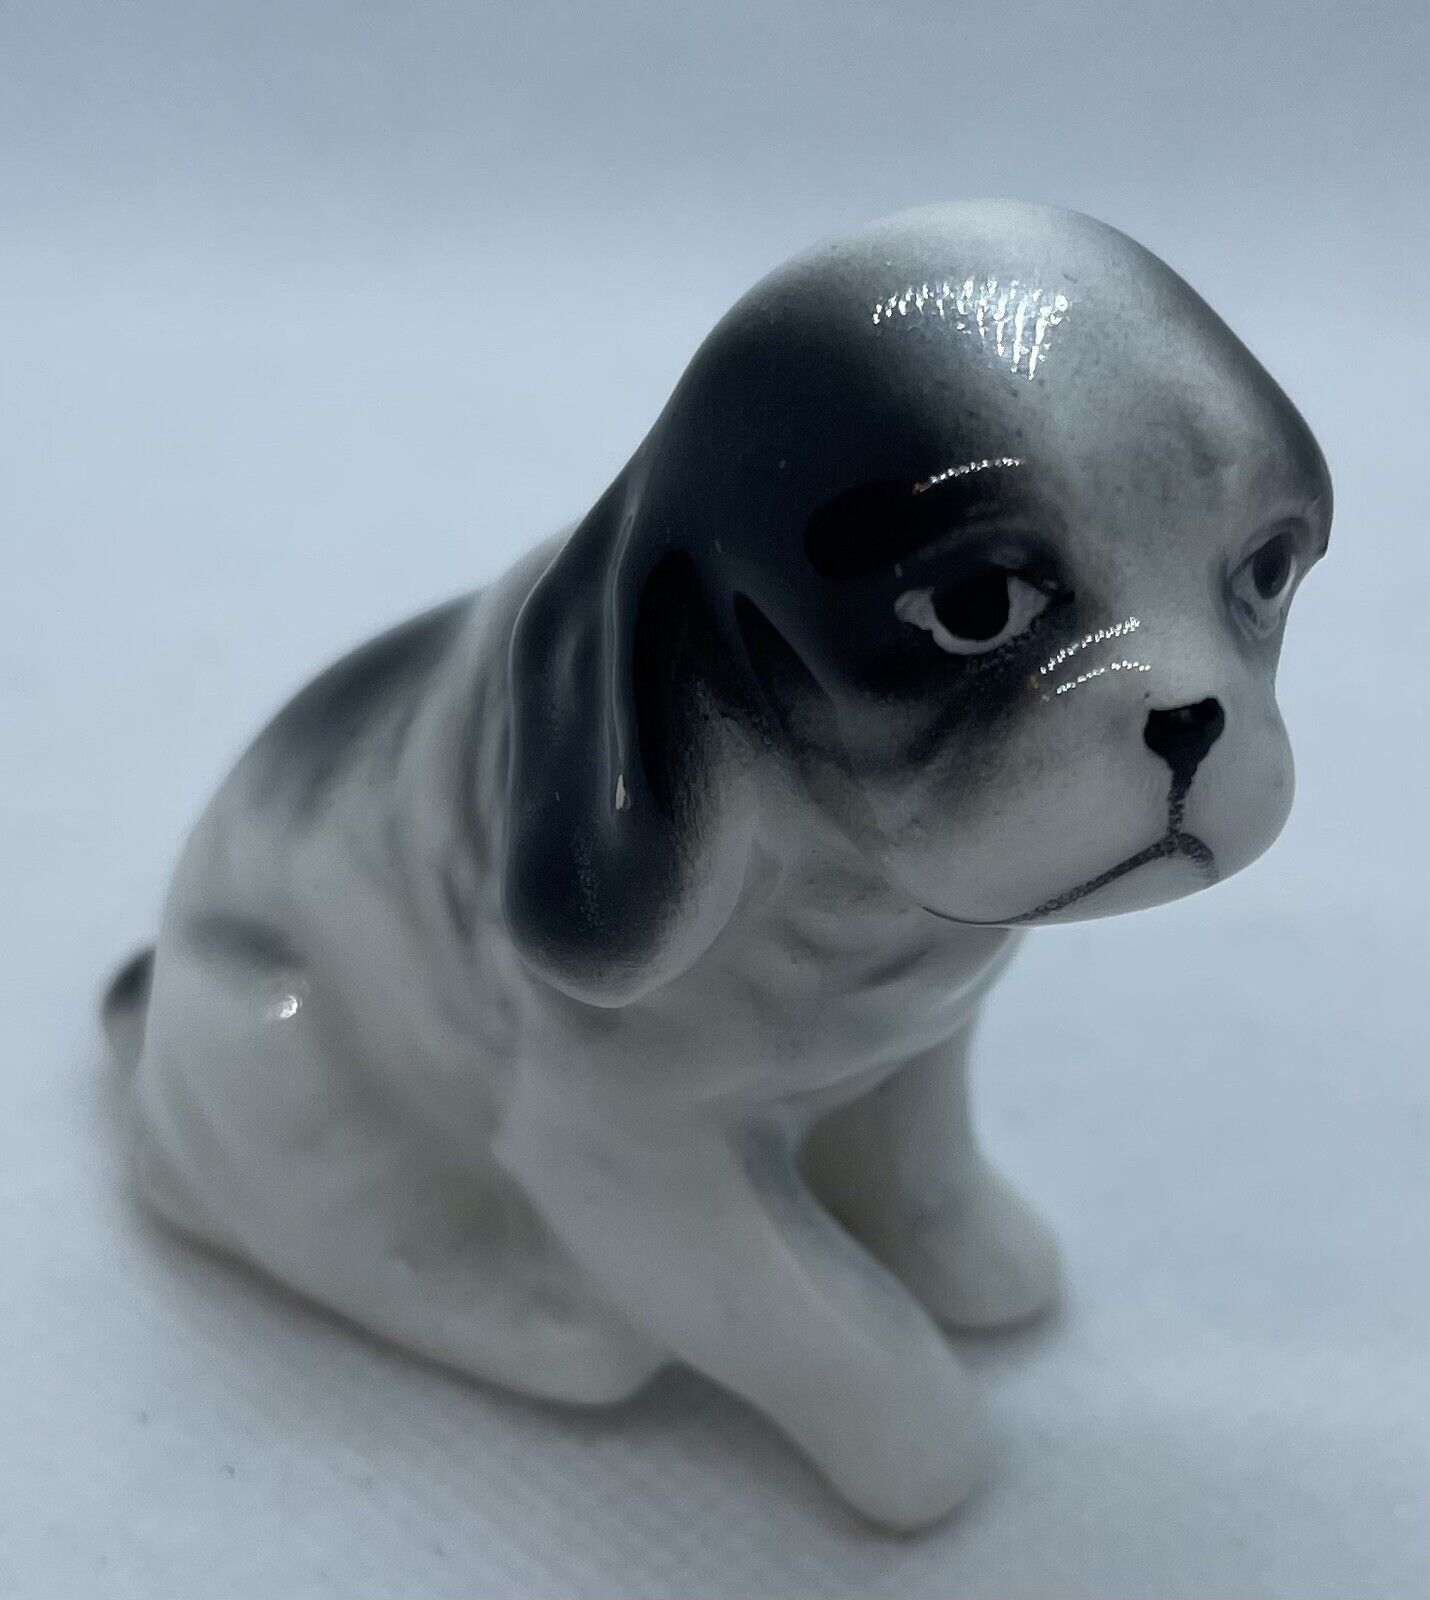 Vintage Cavalier King Charles Spaniel Dog Figurine 2.25 Inches - Inarco - Japan